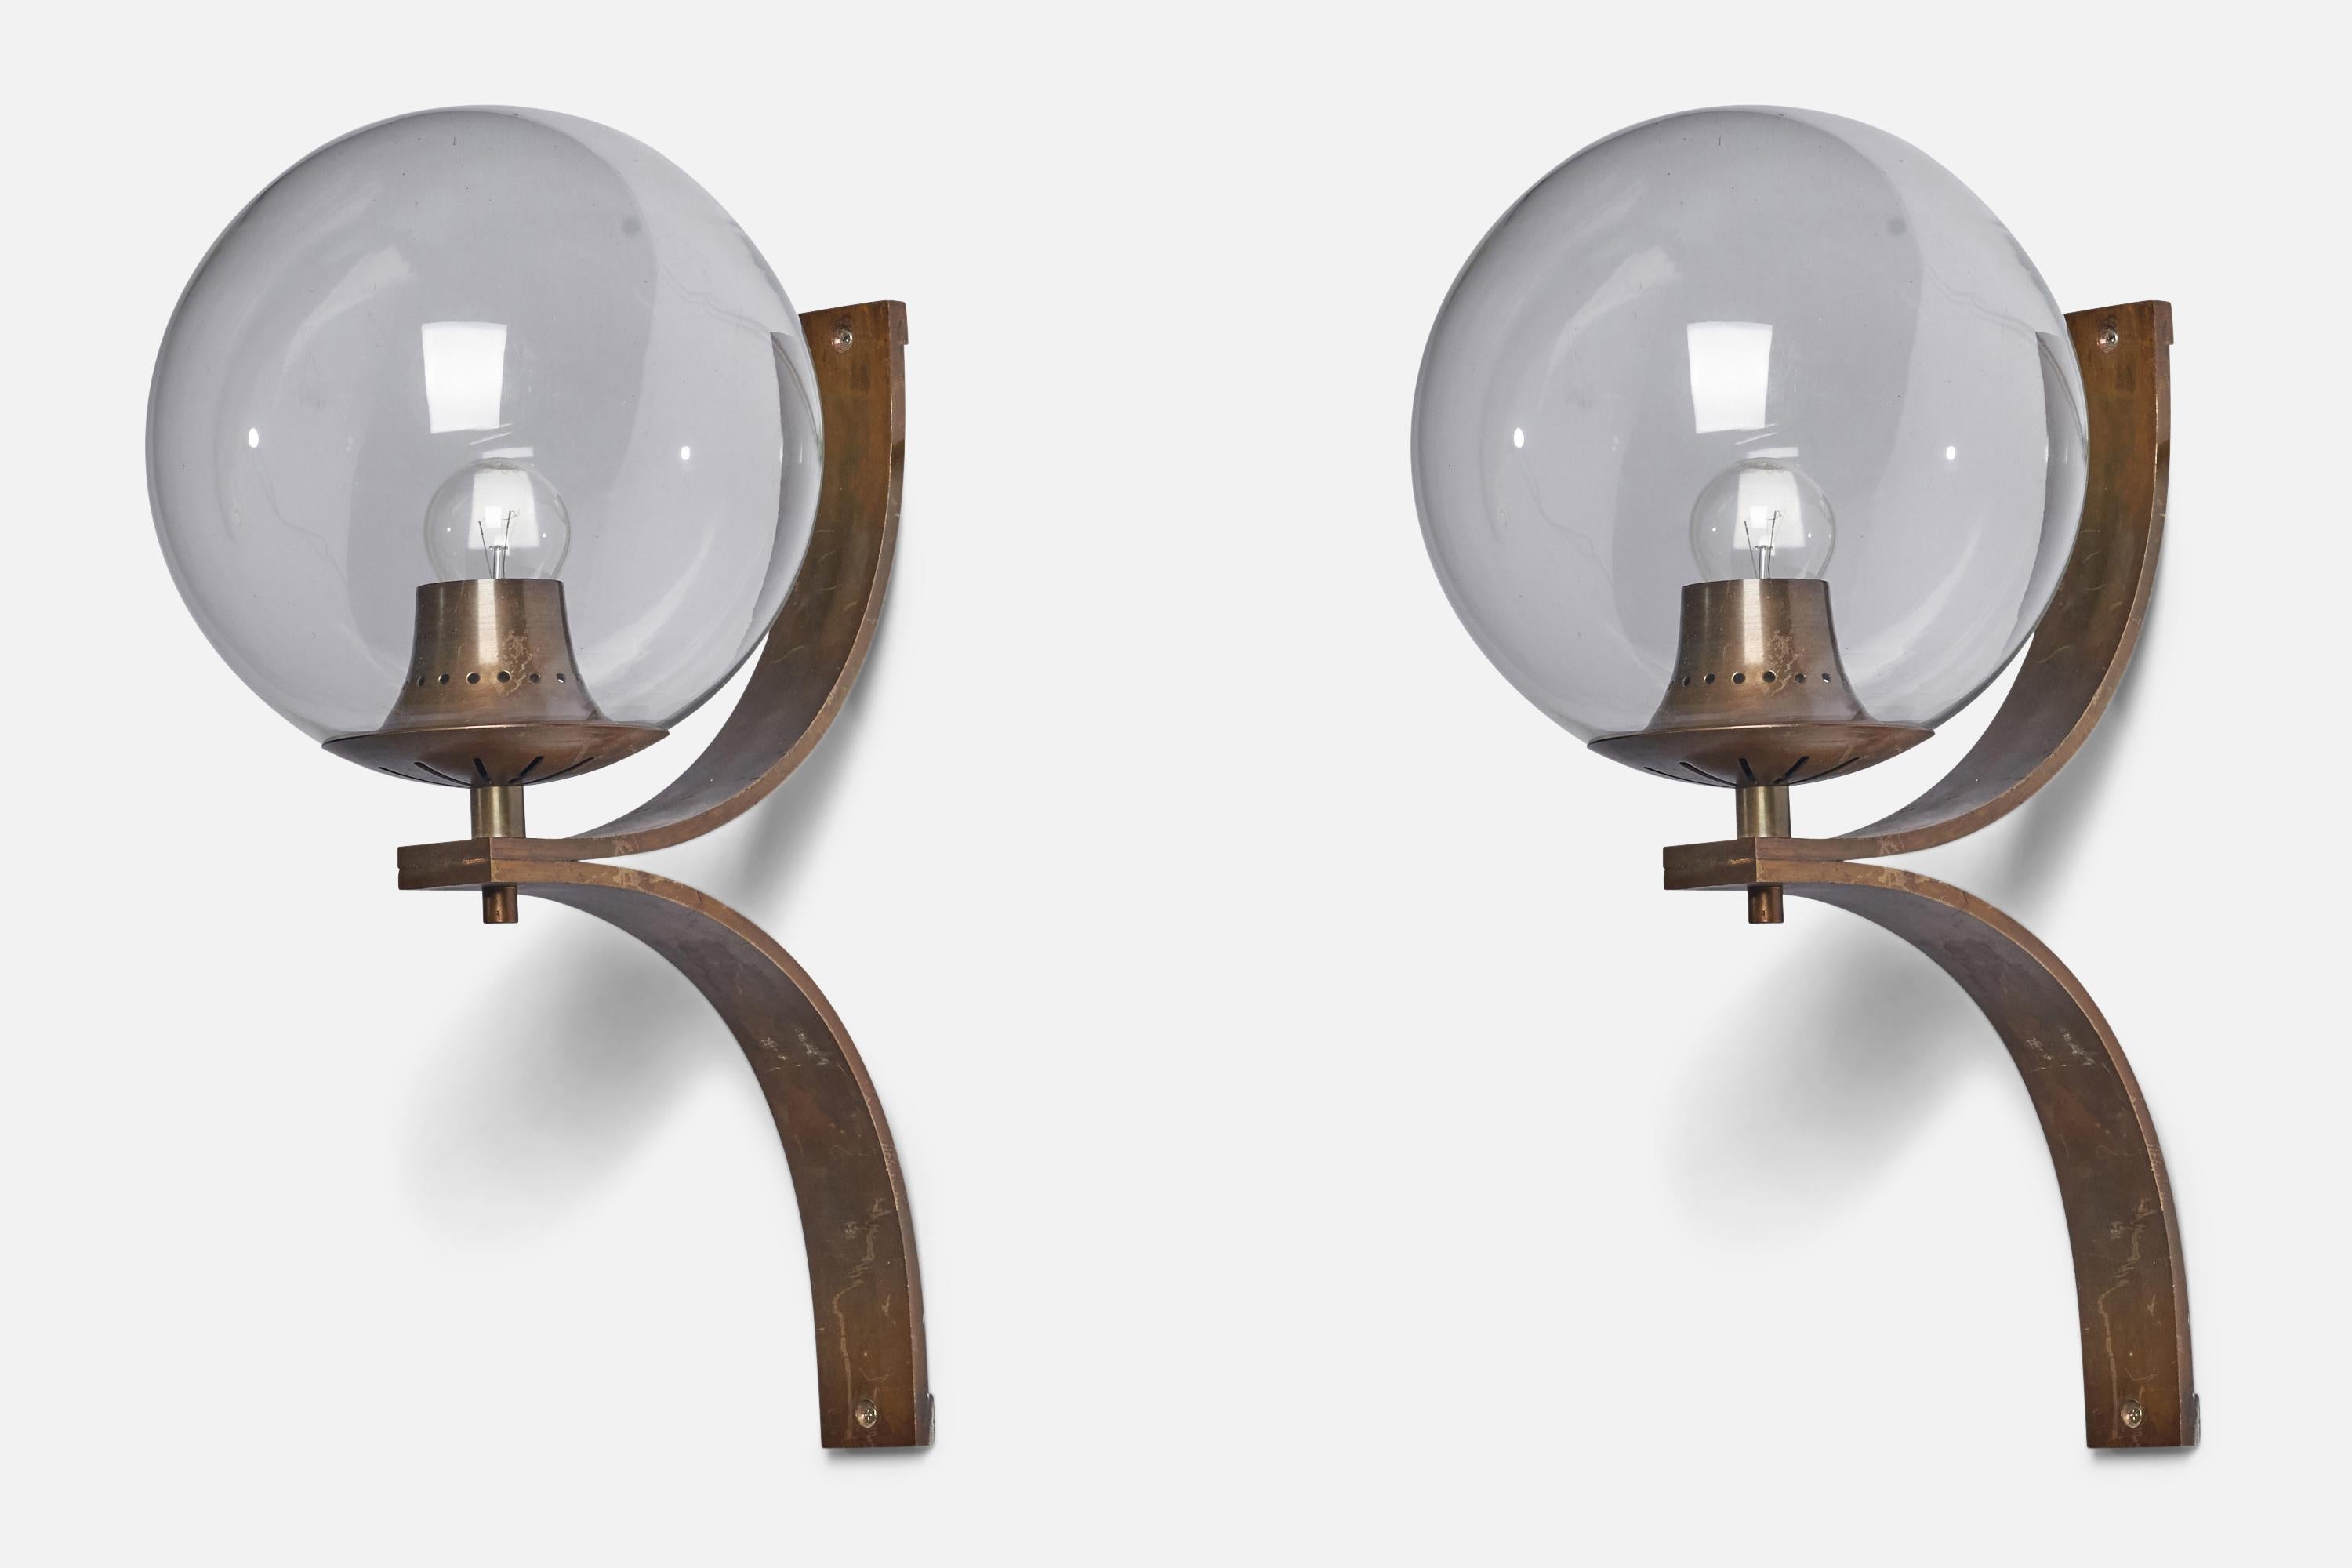 A pair of sizeable brass and glass wall lights, designed and produced in Italy, 1960s.

Overall Dimensions: 23.25